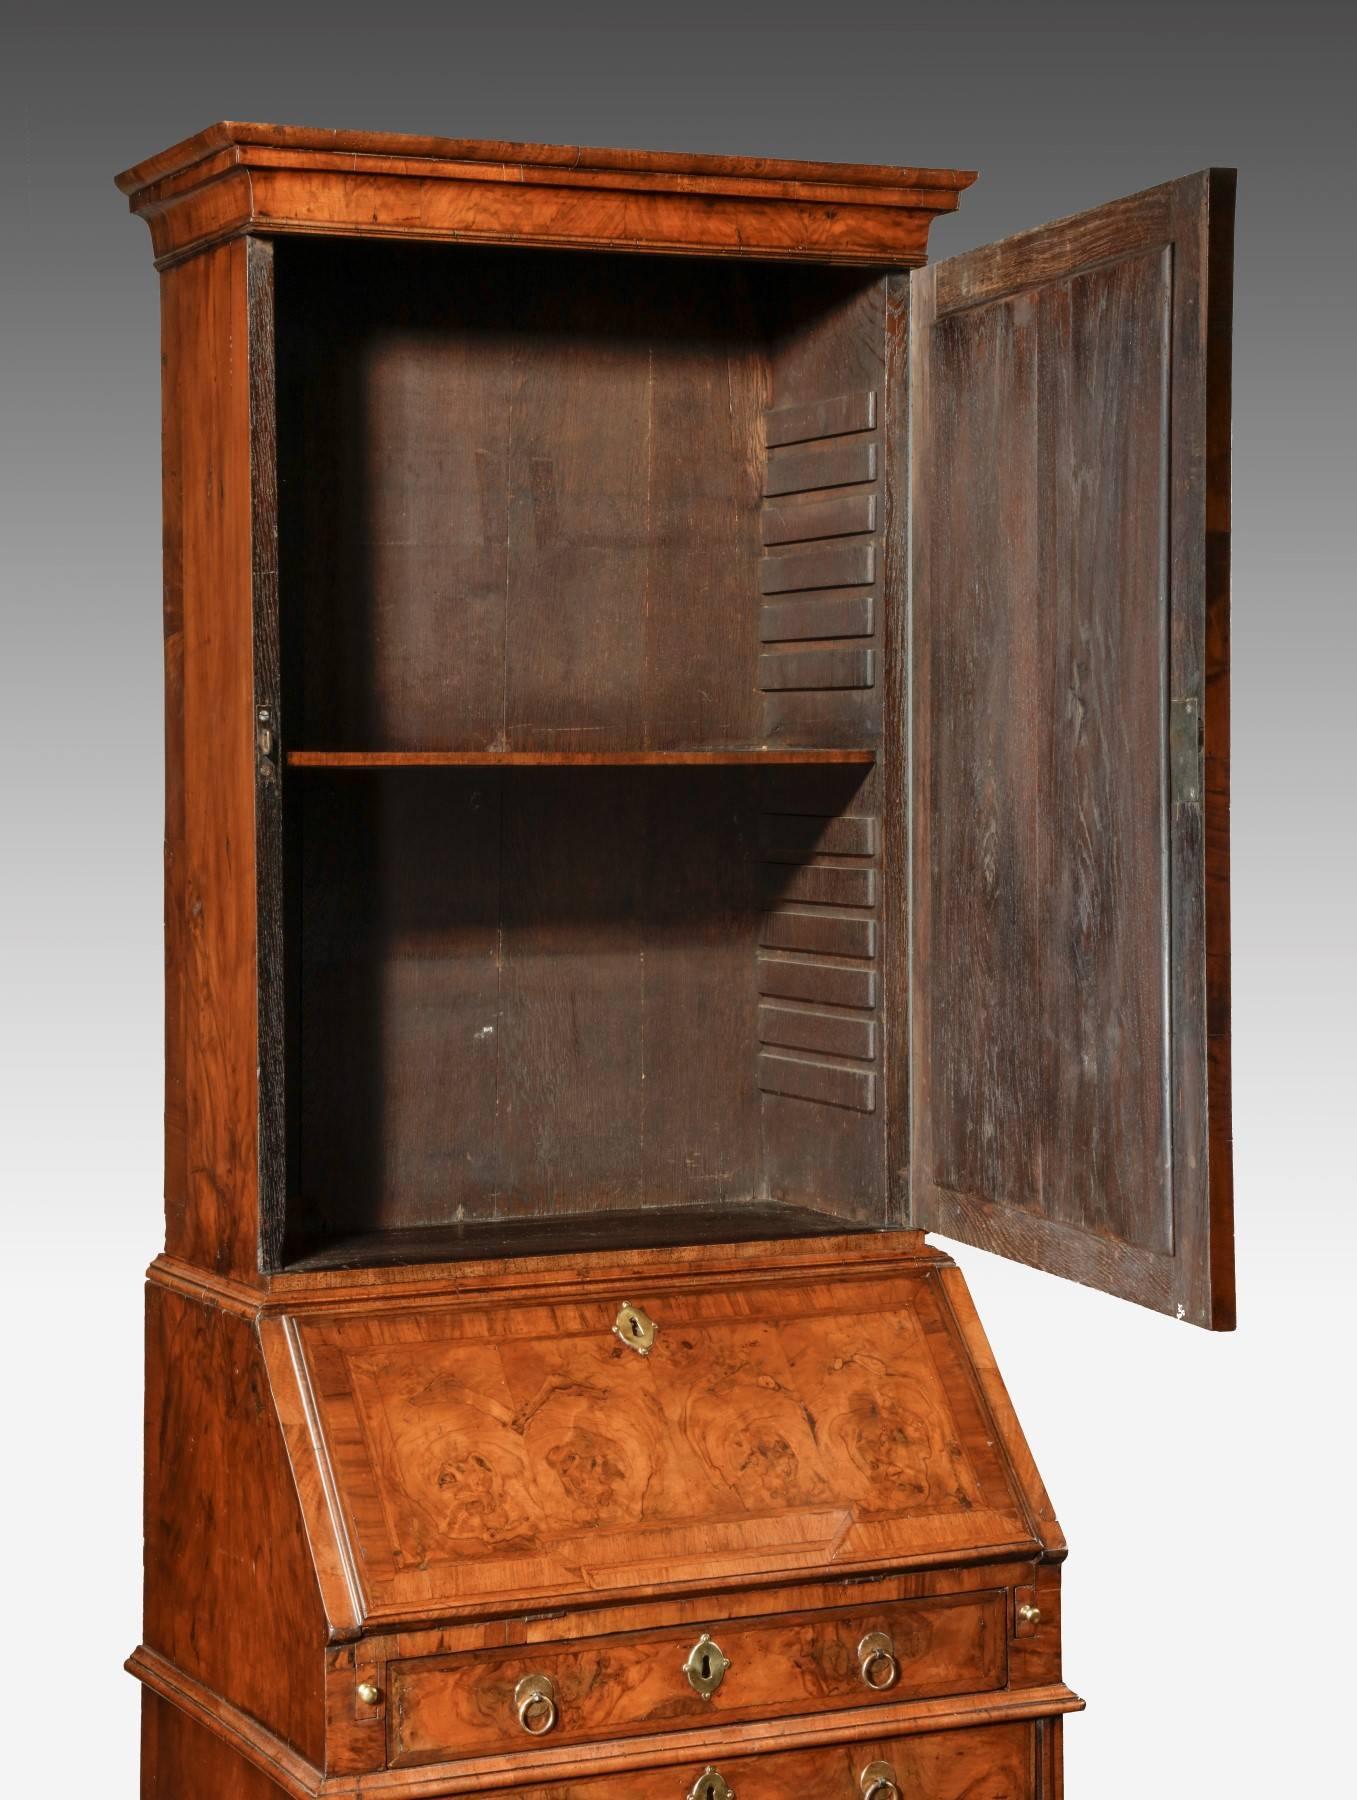 Queen Anne Narrow Walnut Bureau Bookcase In Excellent Condition For Sale In Hungerford, Berkshire